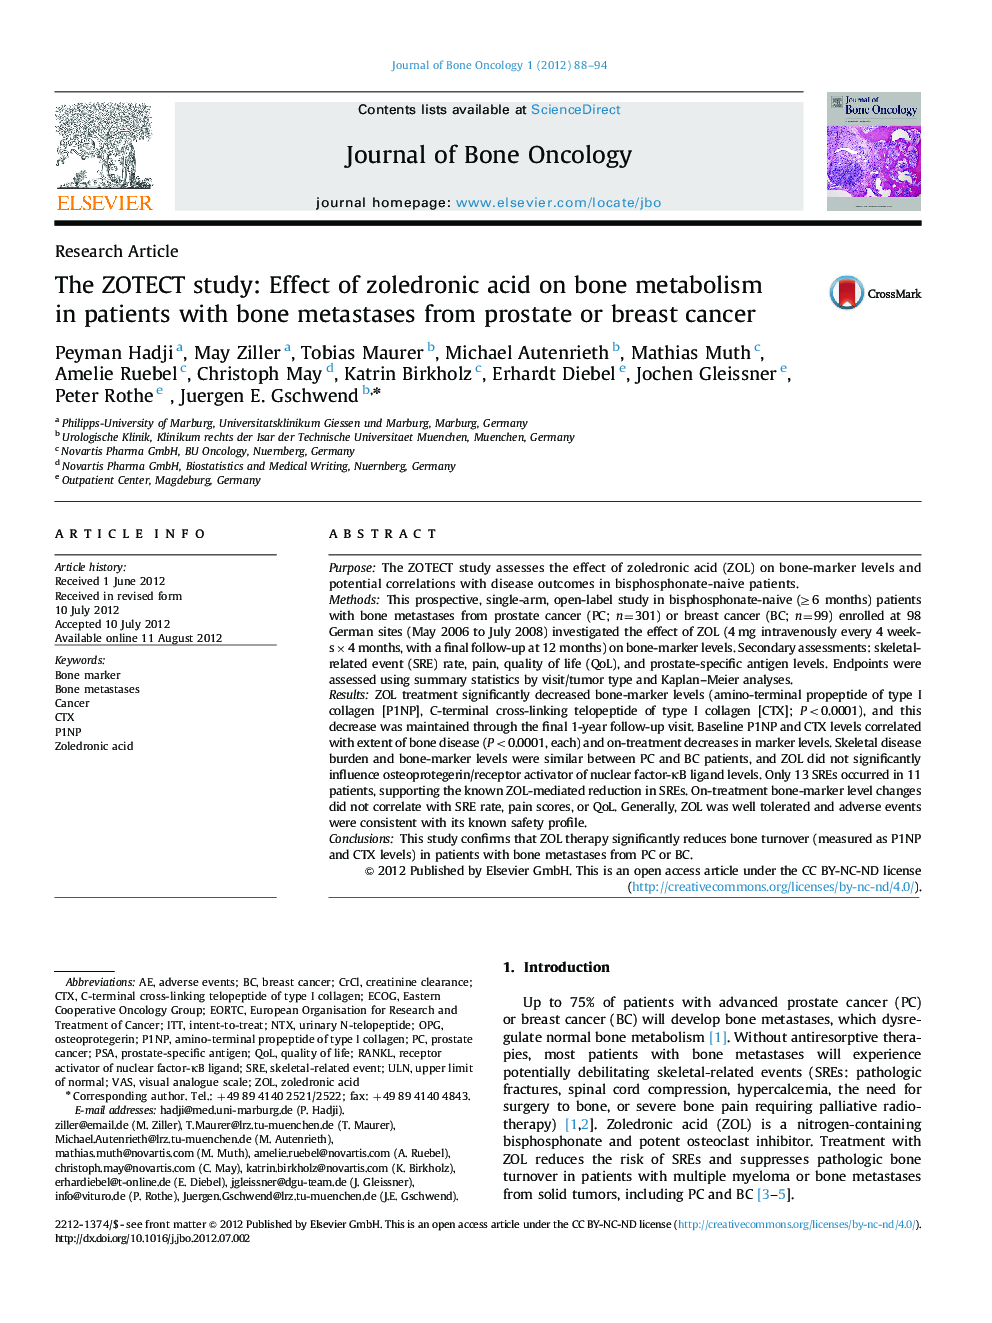 The ZOTECT study: Effect of zoledronic acid on bone metabolism in patients with bone metastases from prostate or breast cancer